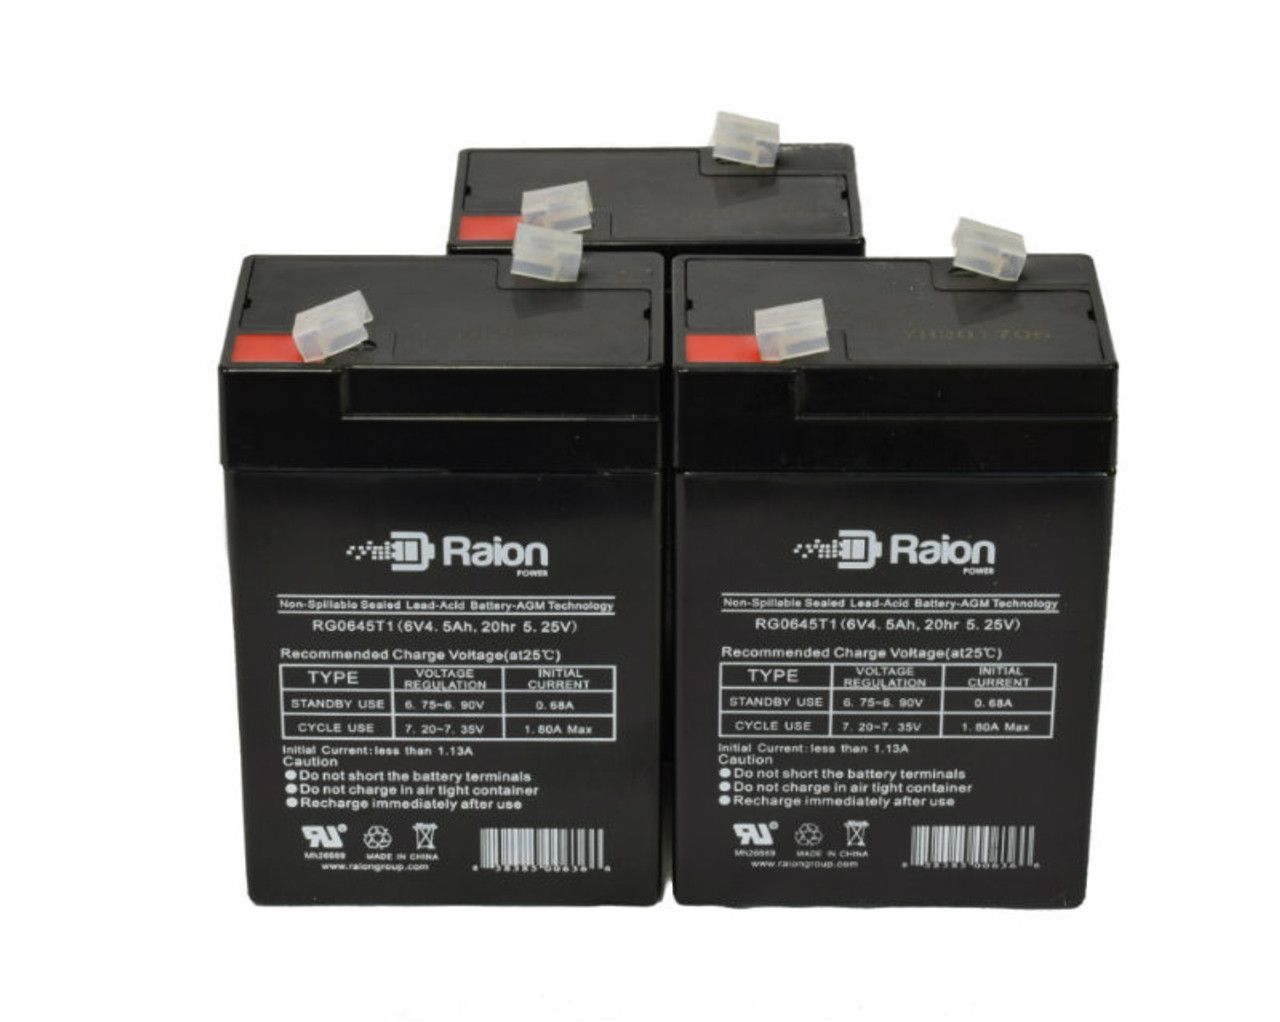 Raion Power RG0645T1 6V 4.5Ah Replacement Medical Equipment Battery for Criticare Systems 504 Pulse Oximeter - 3 Pack